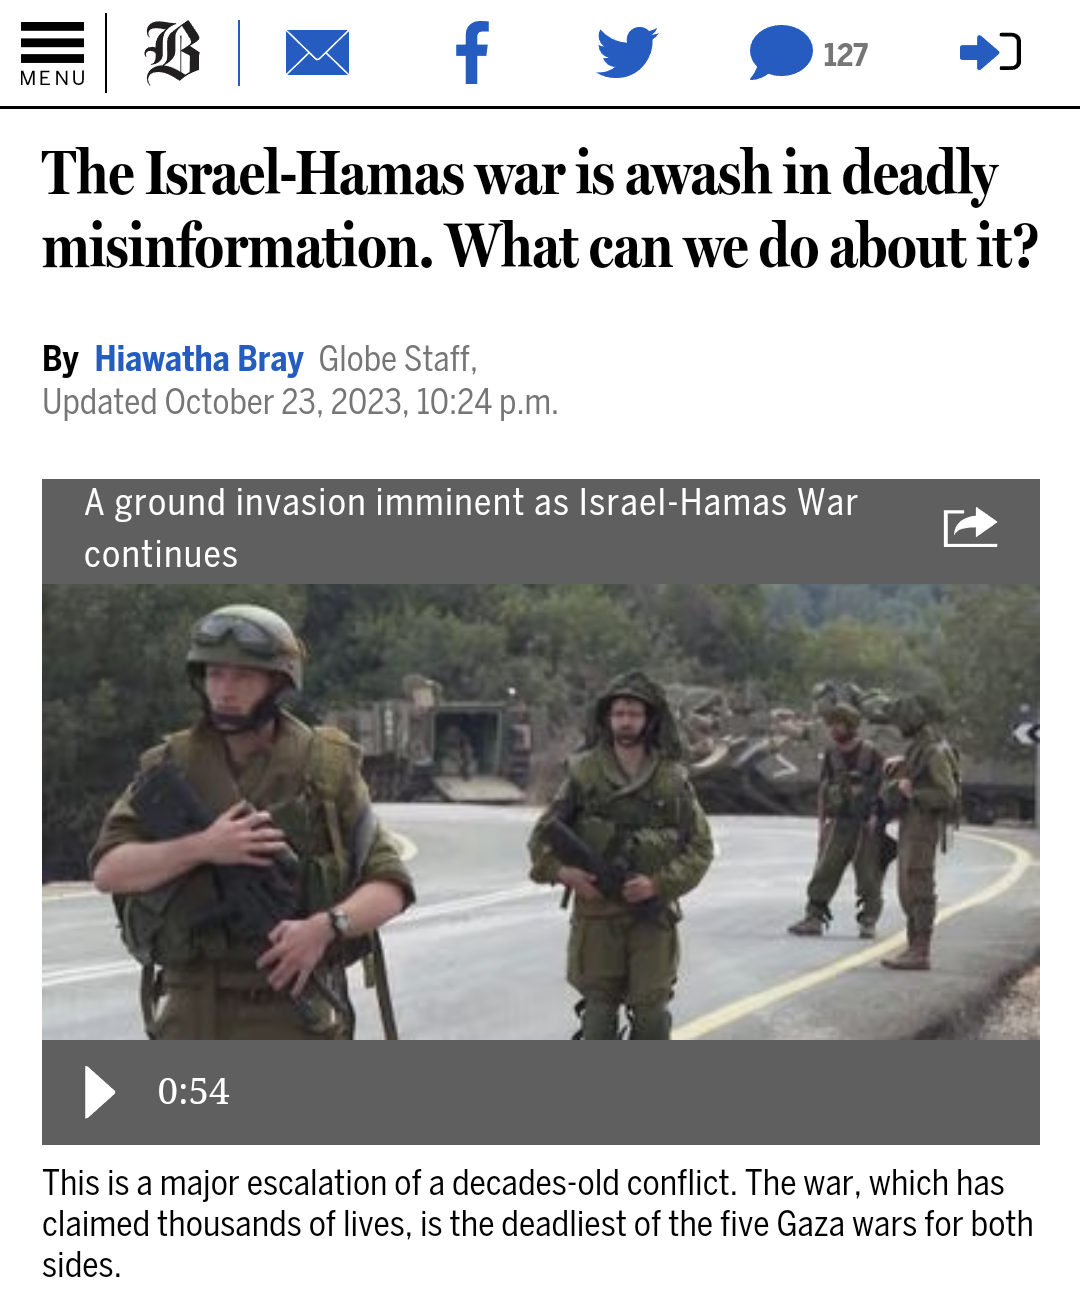 The Isreal-Hamas war is awash in deadly misinformation. What can we do about it?